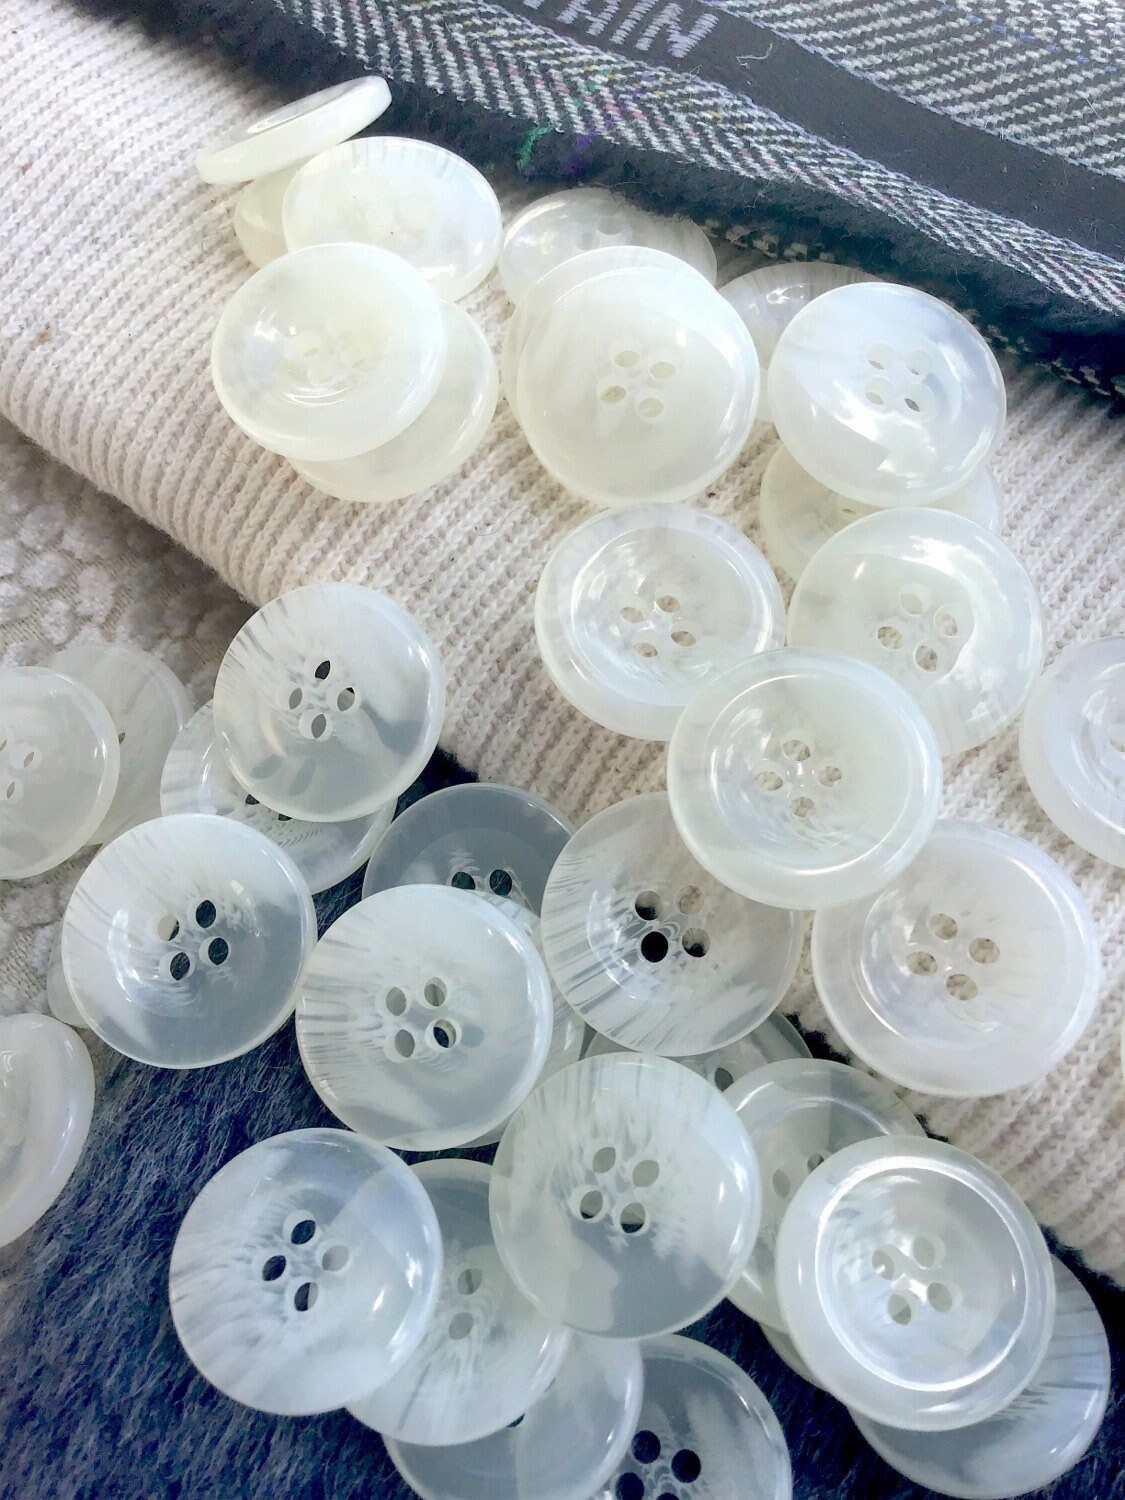 Milky White Italian 4 Hole Clear Buttons 1 (25mm) 40L Sewing Buttons #1070